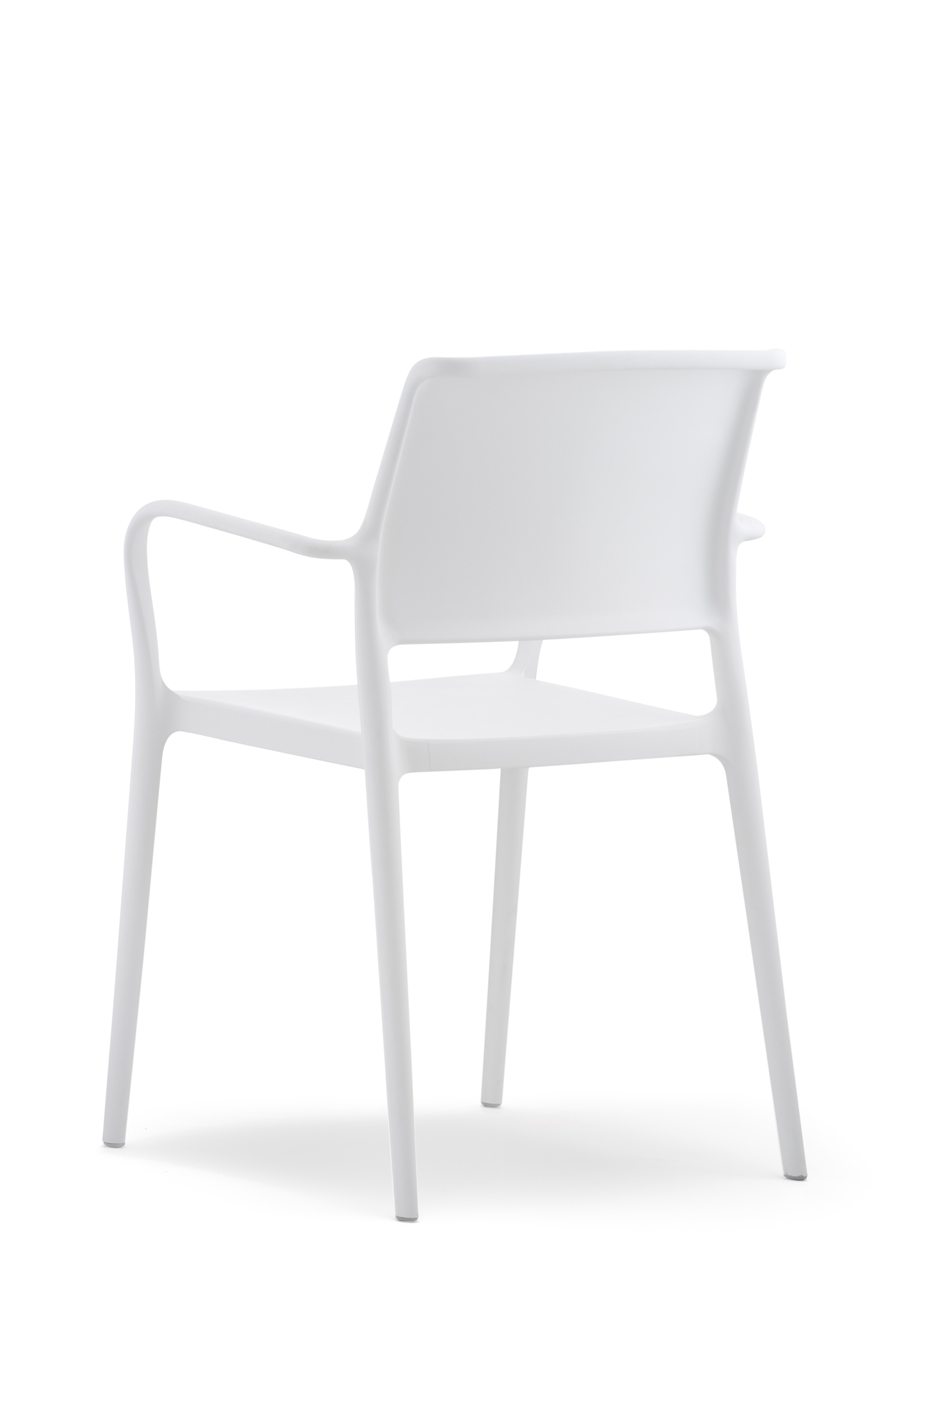 Ara Armchair by Pedrali - Contemporary Multipurpose Chair | MSL Interiors